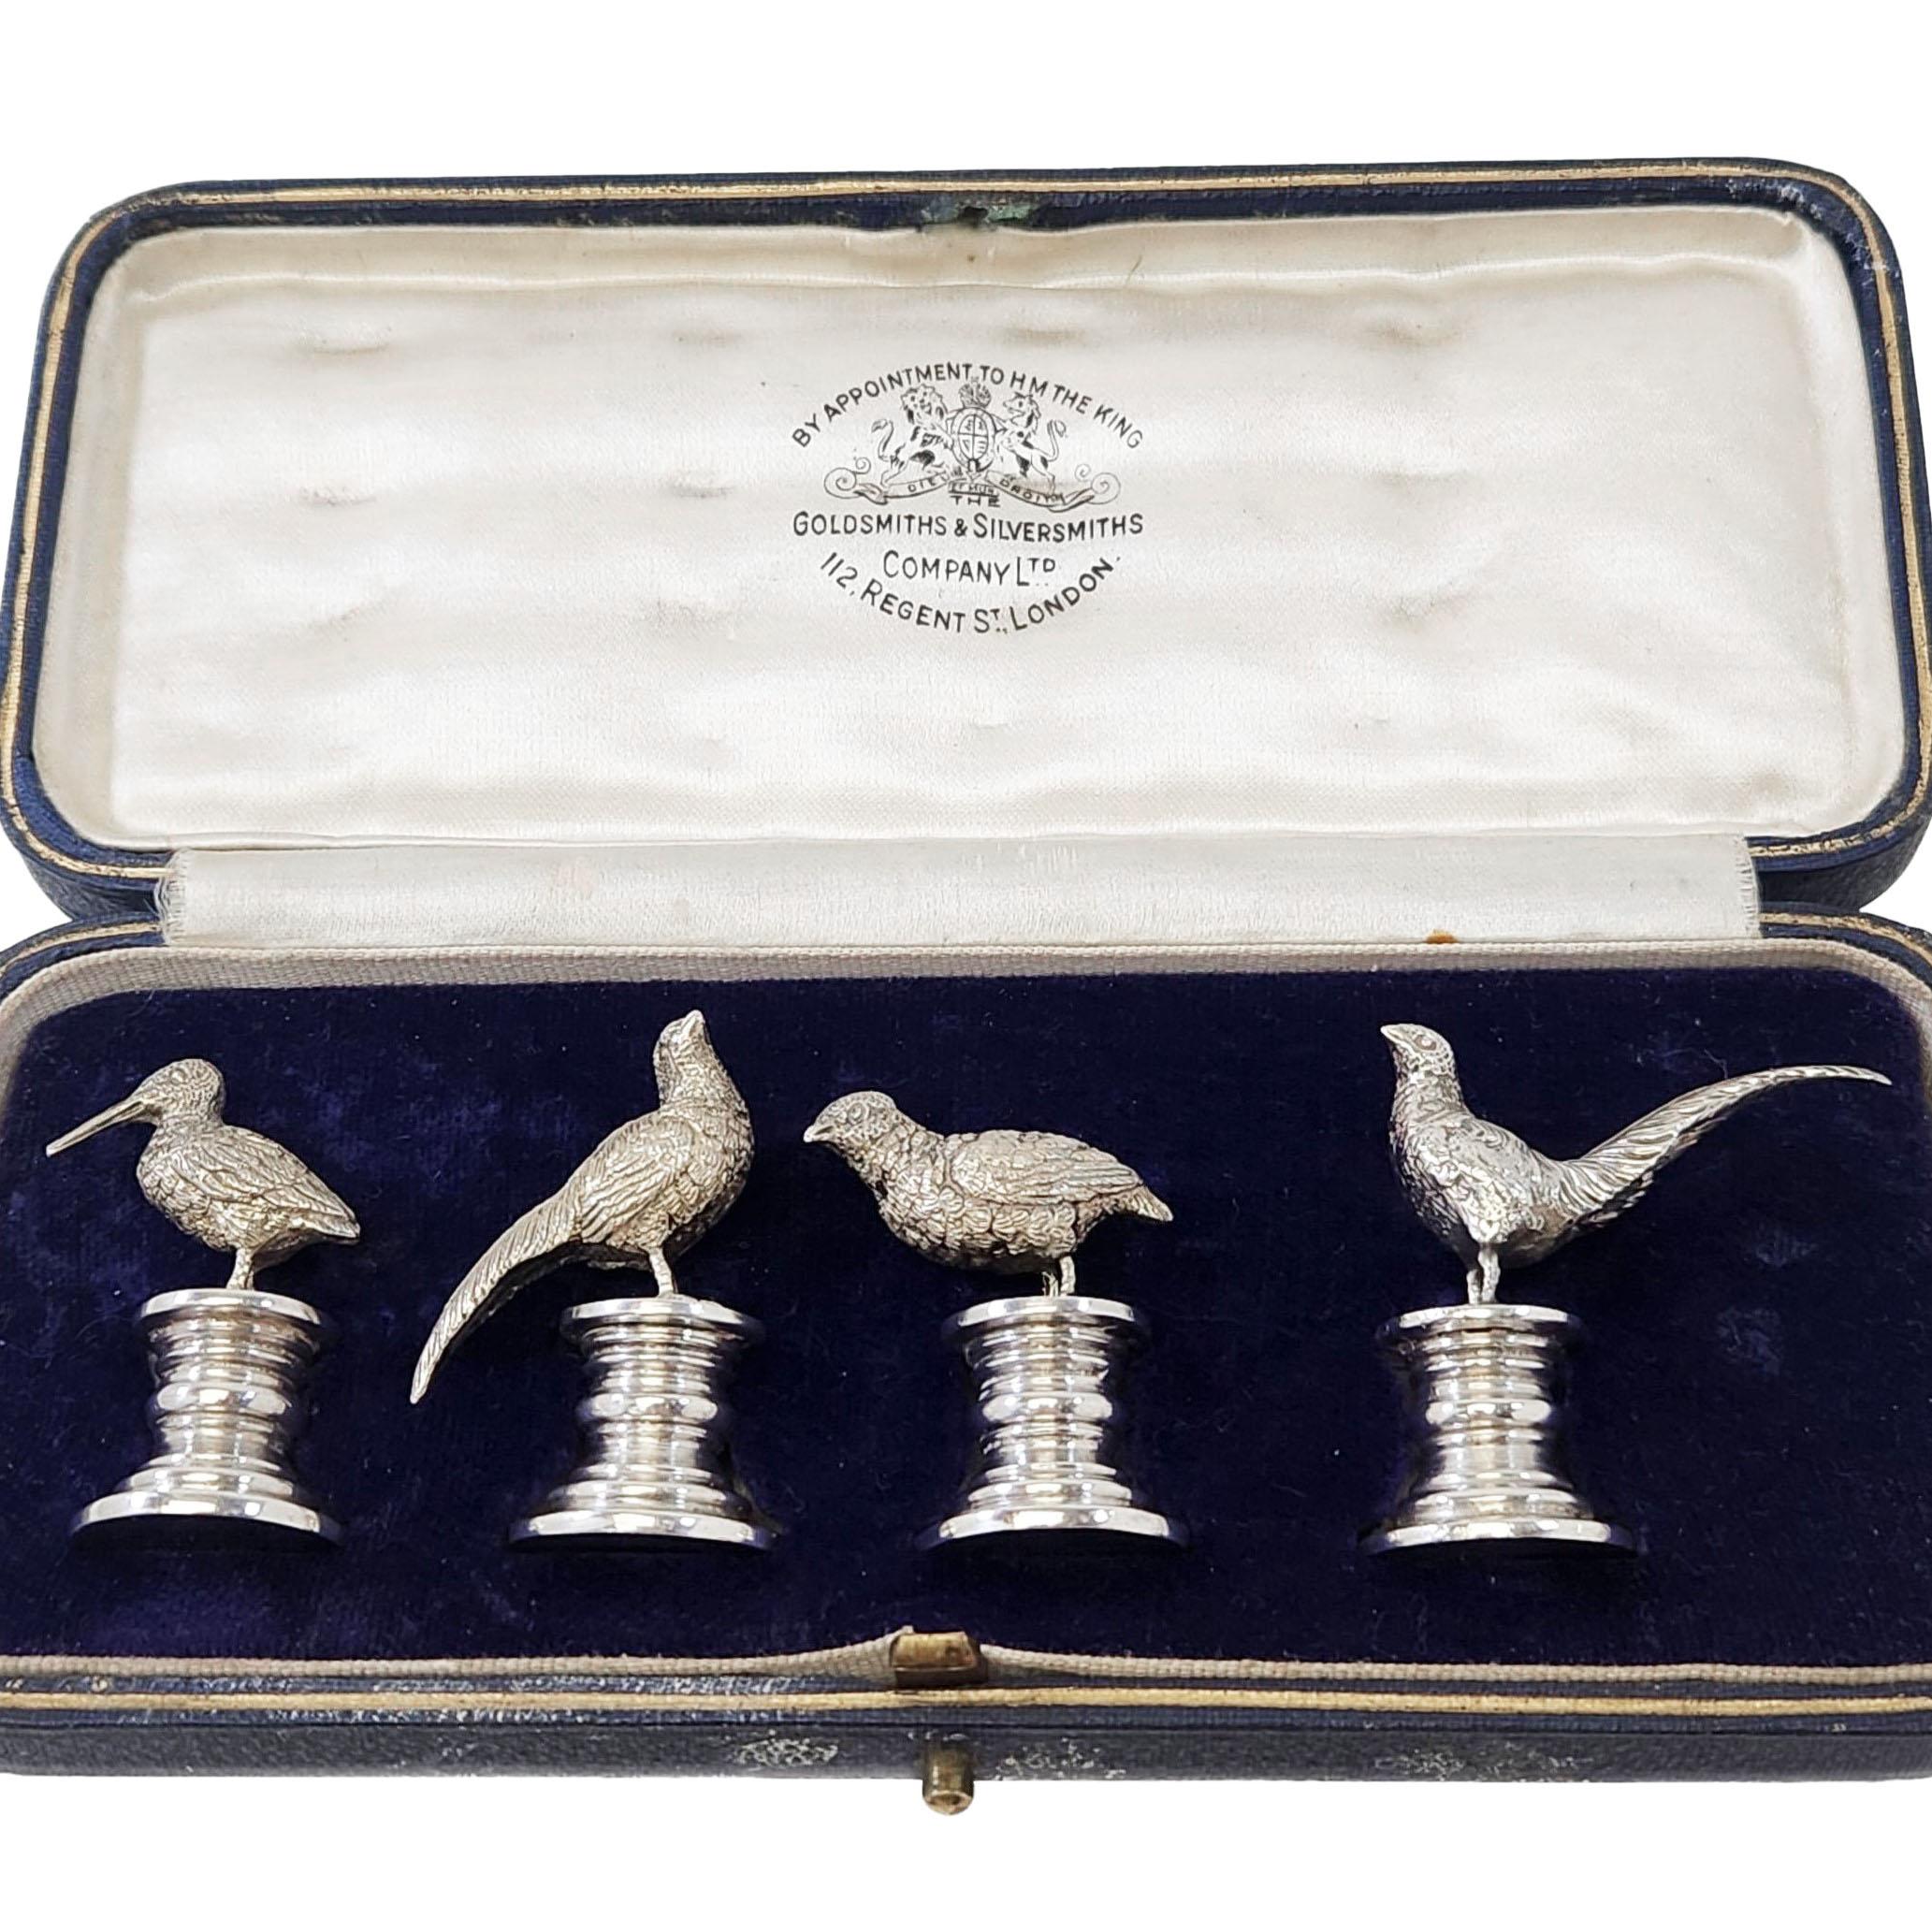 A Set of 4 Solid Silver Place Card Holders in a fitted case, each Menu Holder featuring a different English Bird. 

Made in London, England in 1932.

Approx. Weight - 144g
Approx. Height - 3.7cm - 4.2cm each

Each Menu Holder had a Full English